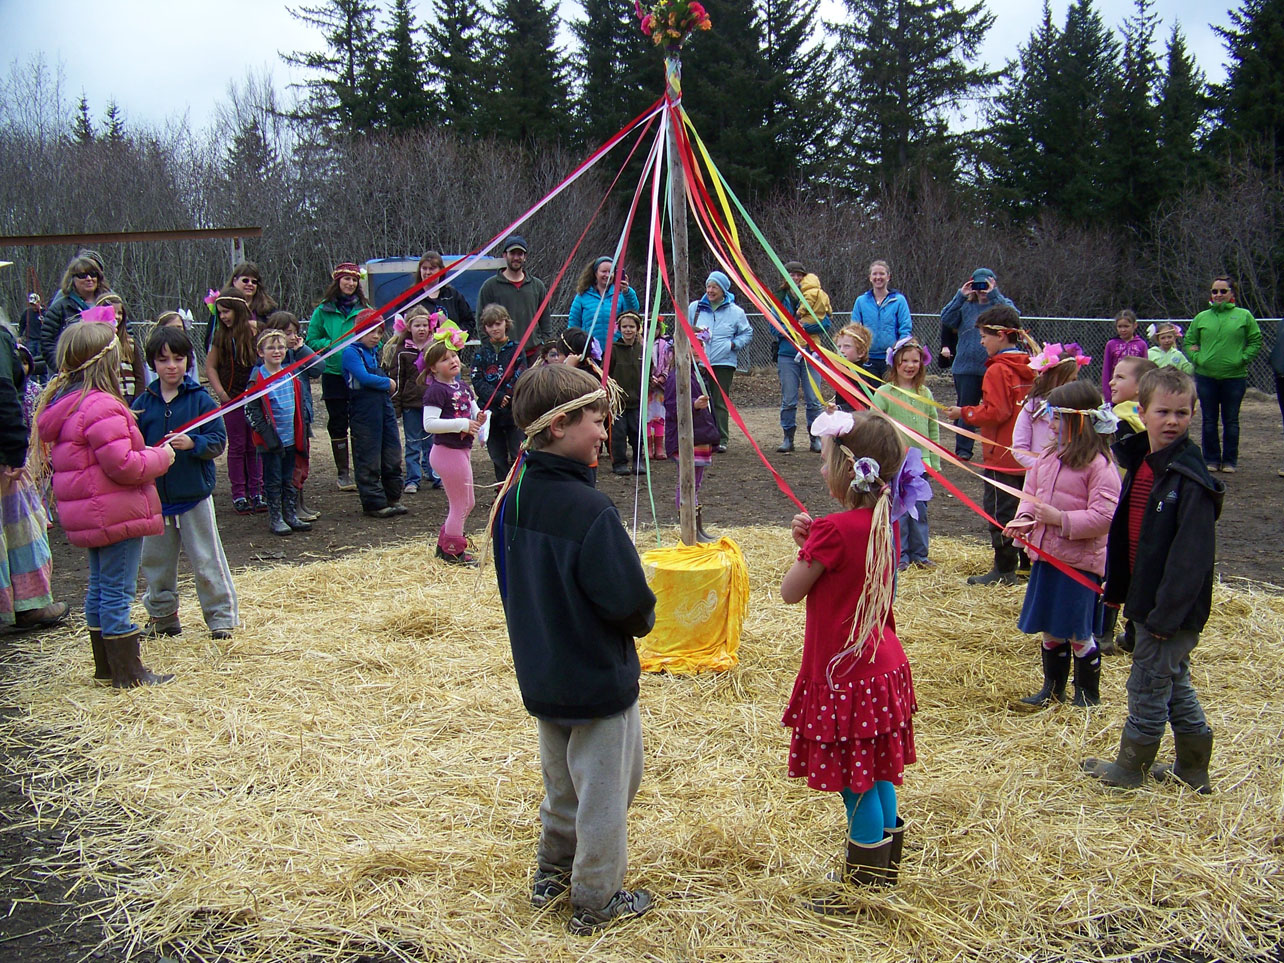 An early morning snowfall and chilly temperatures weren't enough to dampen the May Day Celebration at Fireweed Academy on Saturday. Crafts, a silent dessert auction, musicians and a May Day dance performed by the charter school's younger students kept the festivities going.-Photo by McKibben Jackinsky, Homer News